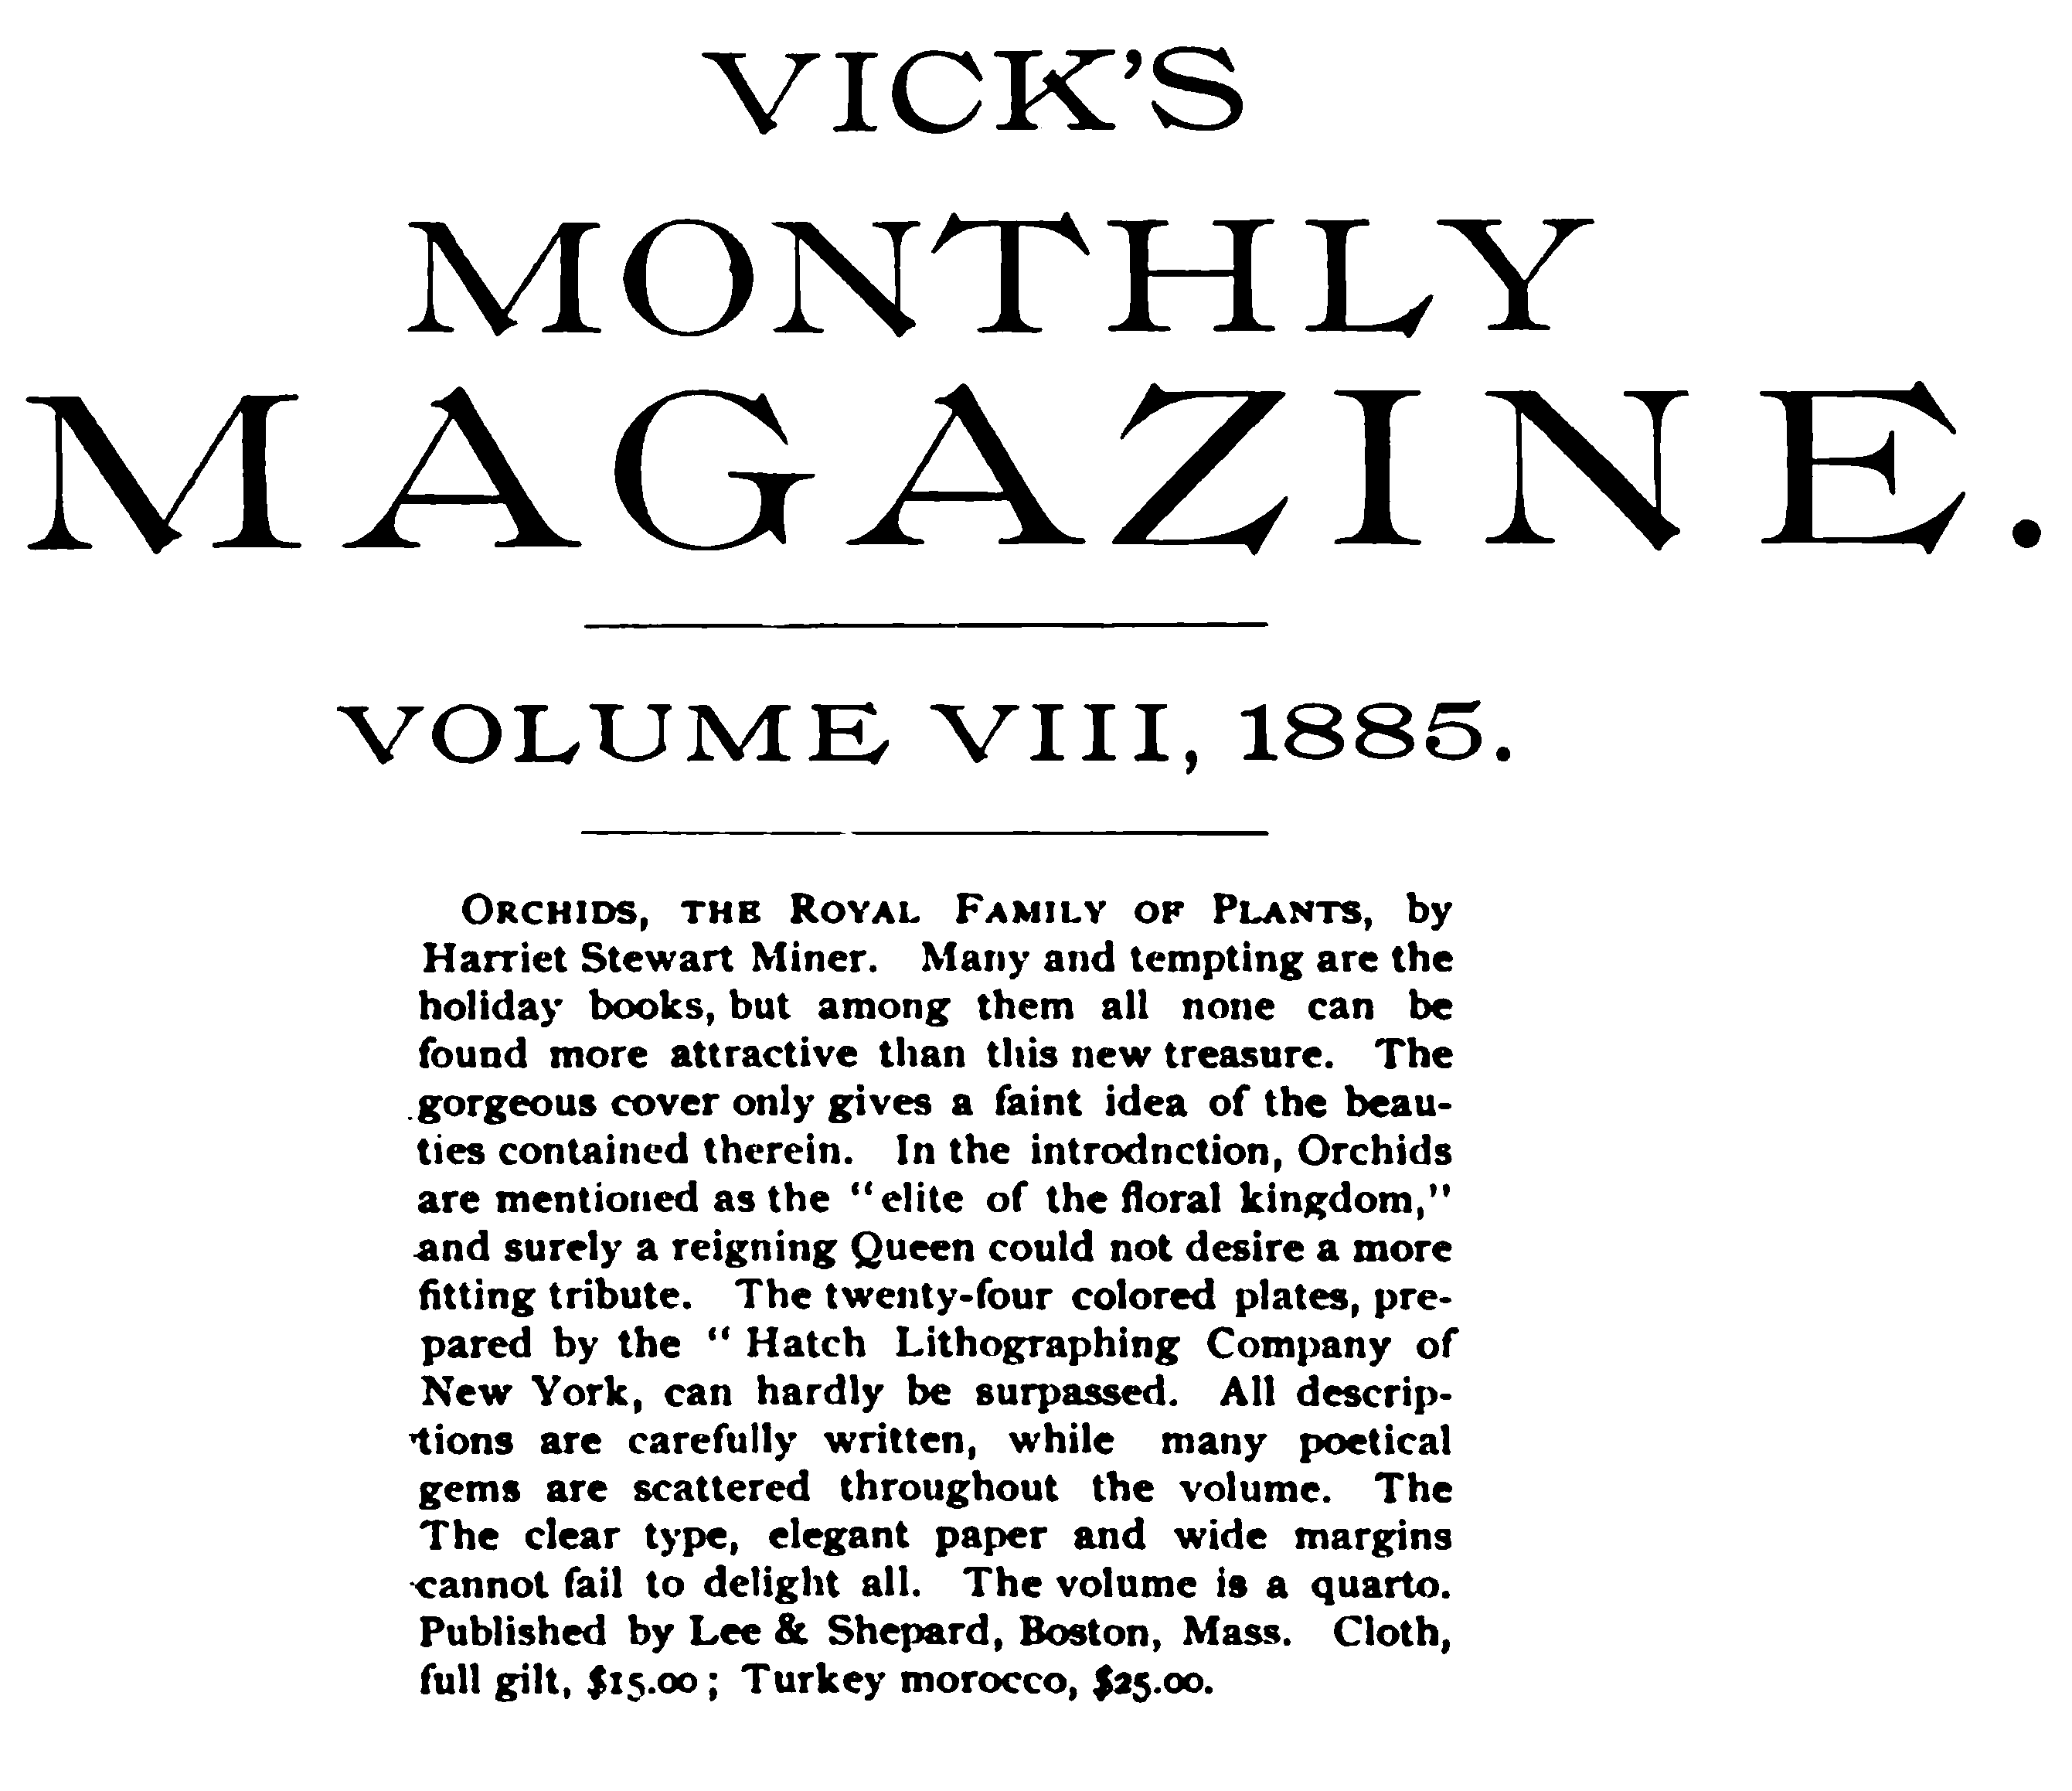 vicks_monthly_magazine_1885-harriet-stewart-miner-orchids-the_royal_family_of_plants